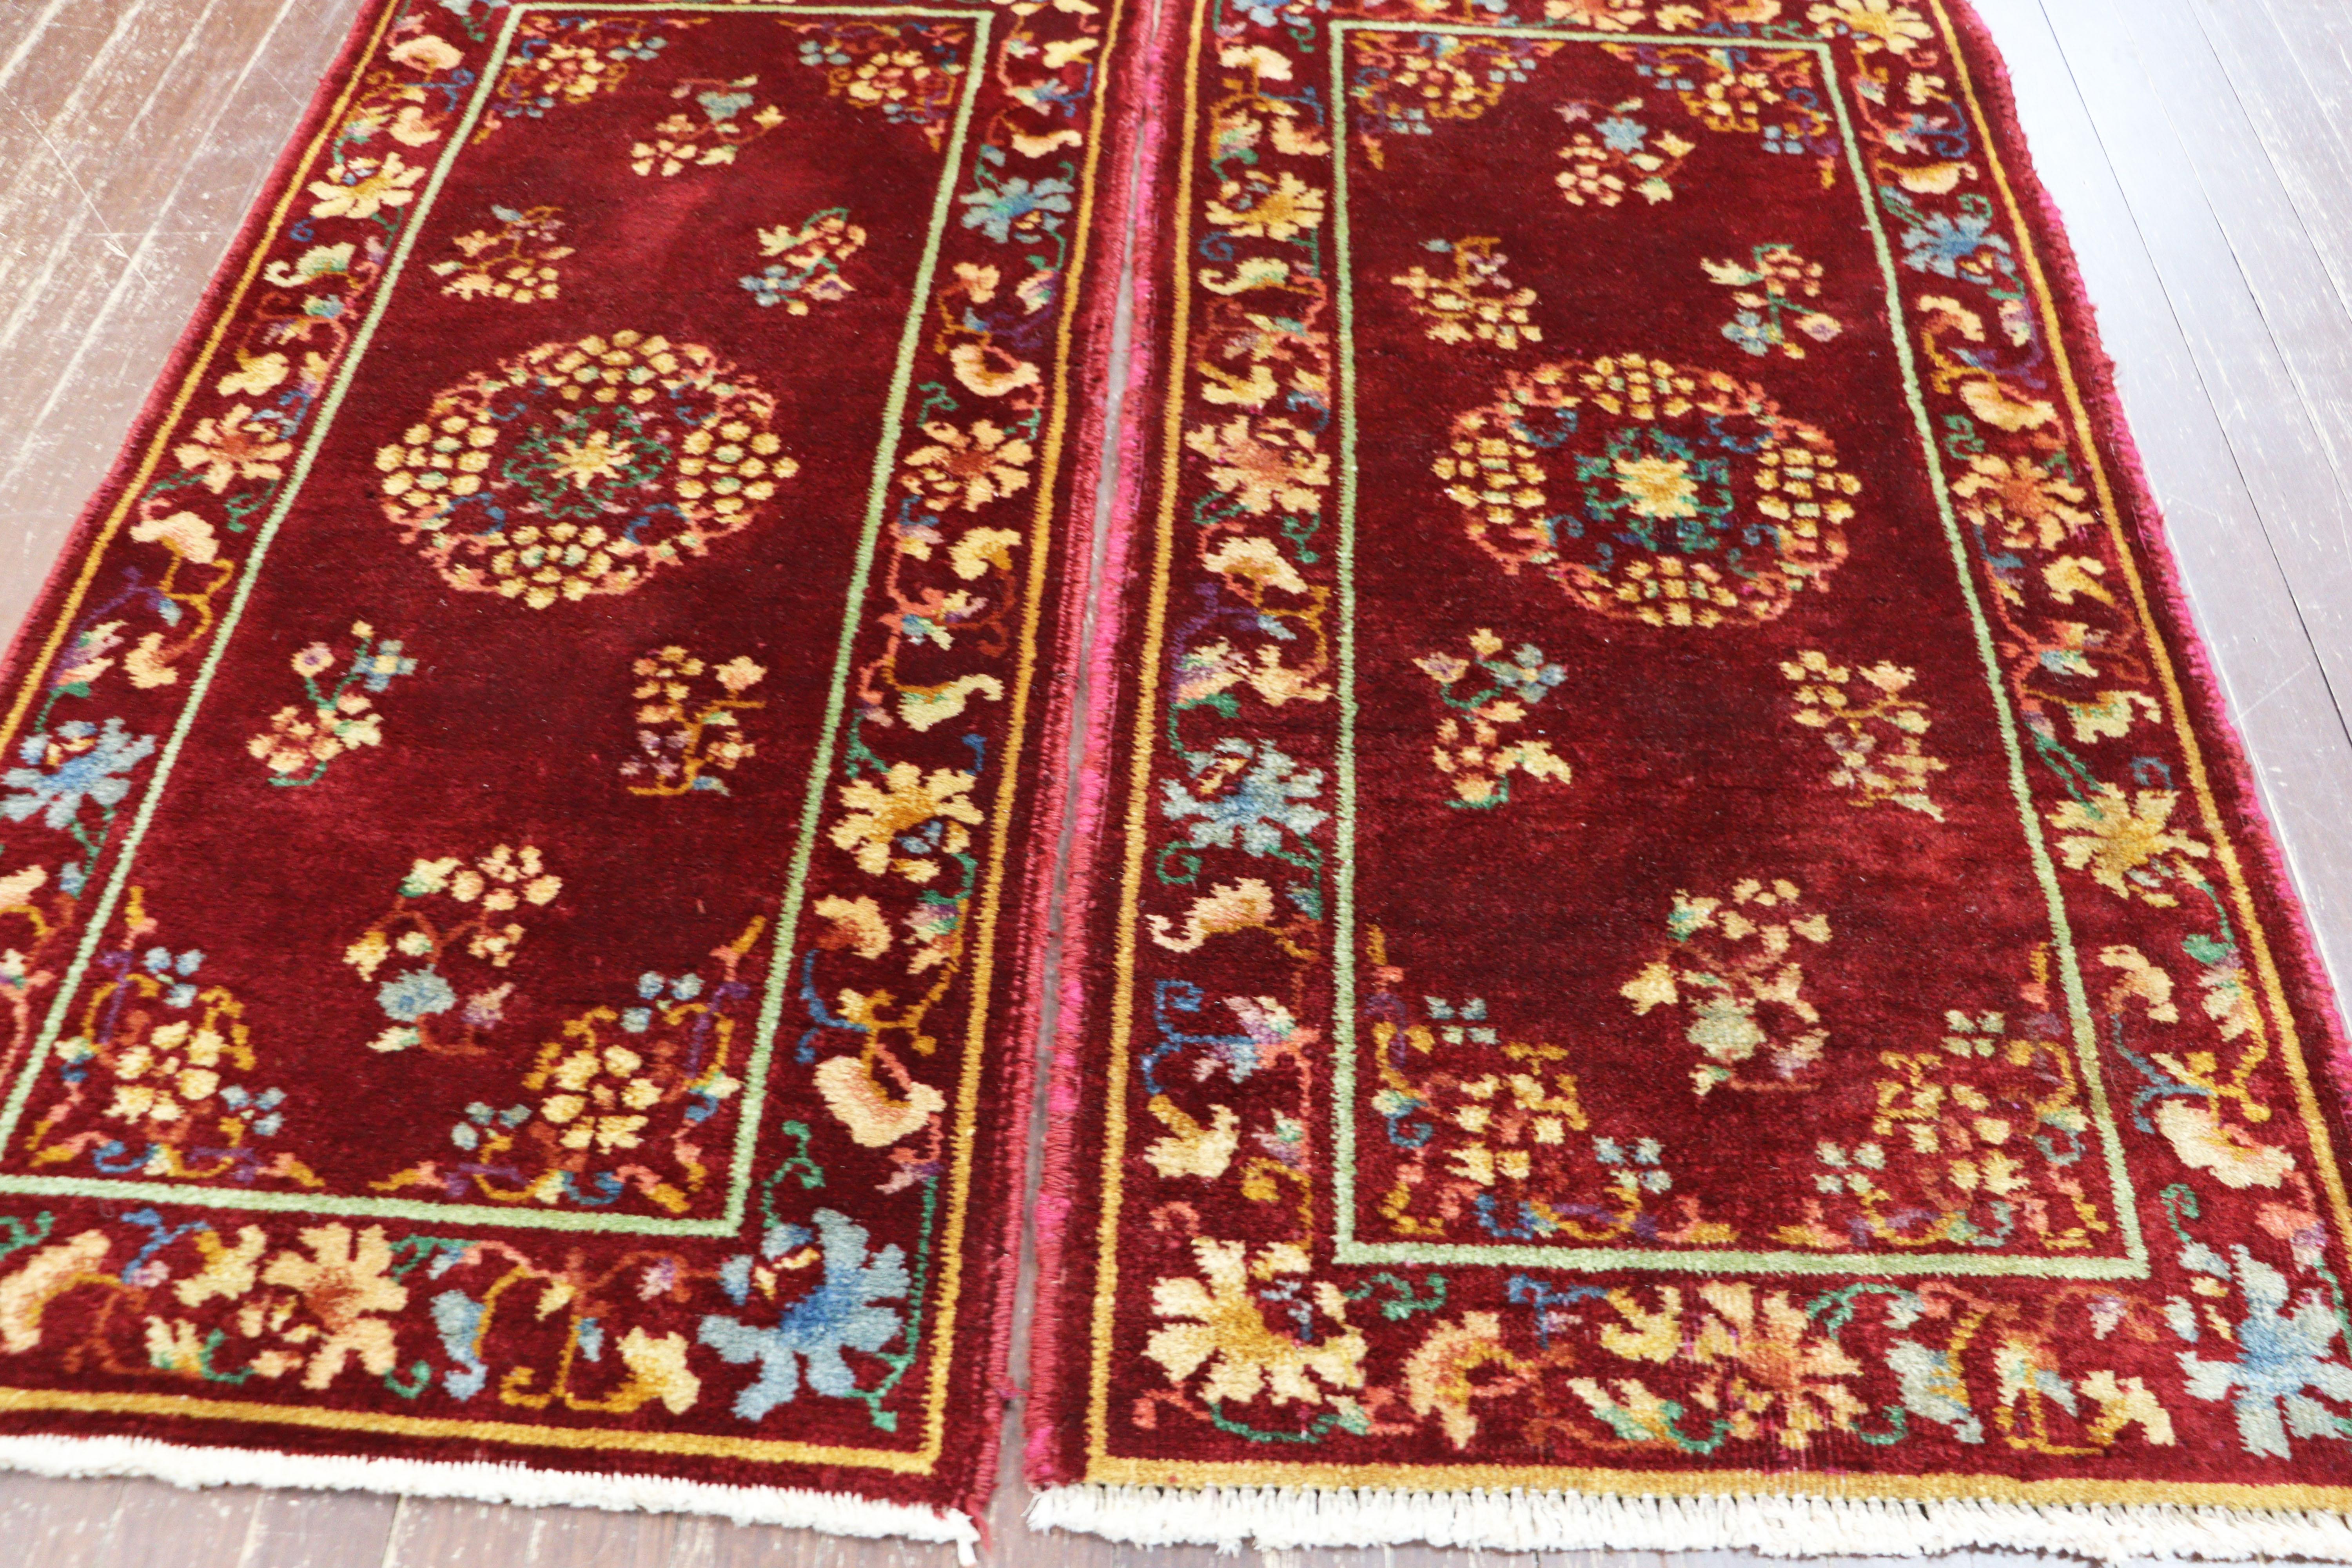 A Pair of Antique Art Deco Chinese Oriental Rug, 2' x 3'10